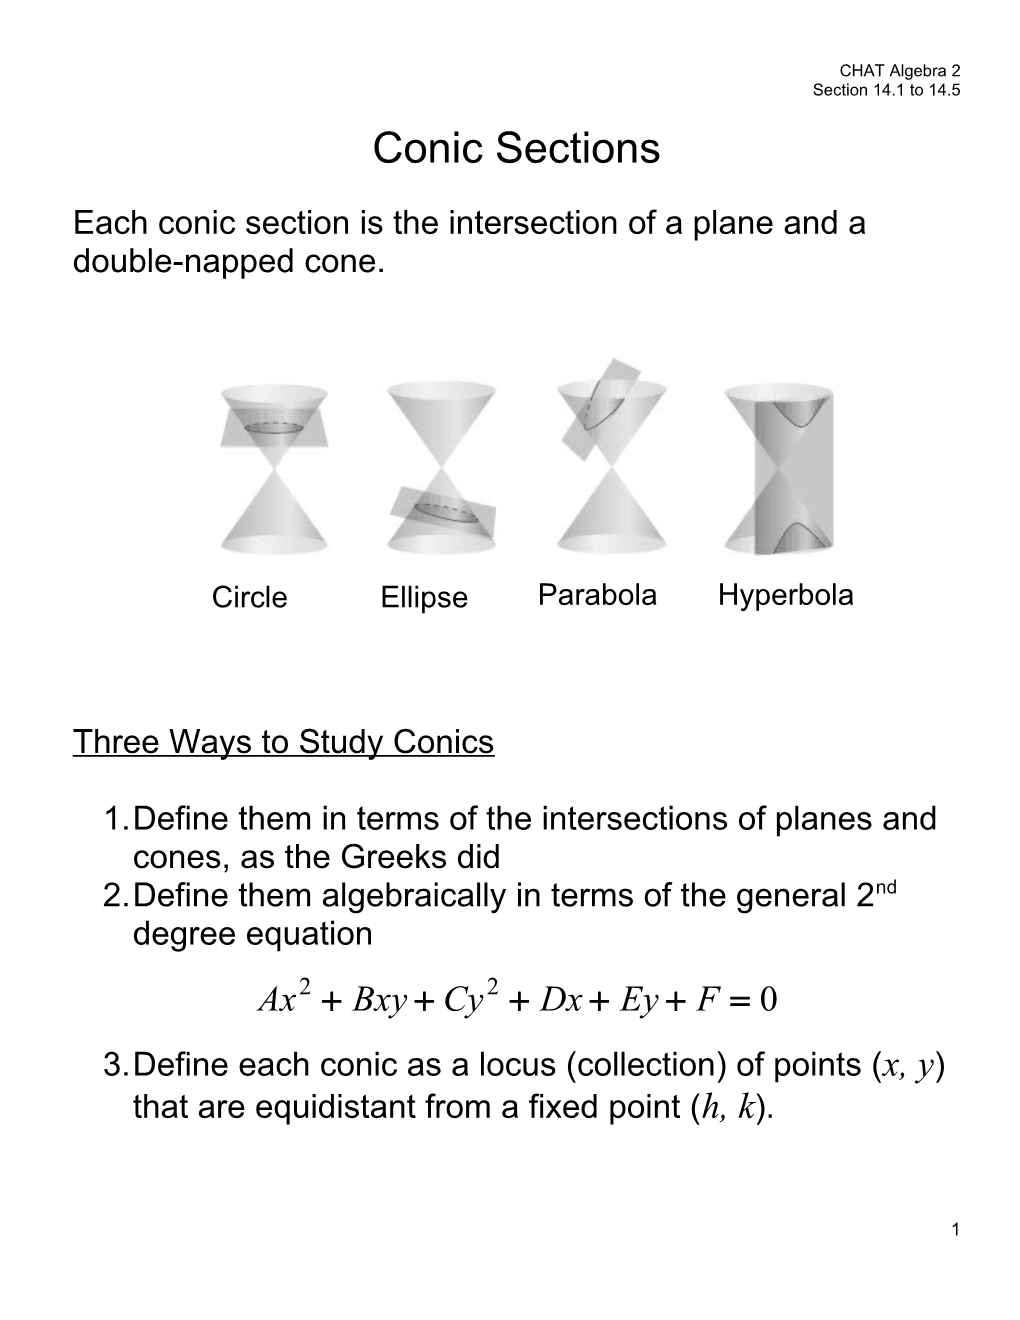 Eachconic Section Is the Intersection of a Plane and a Double-Napped Cone